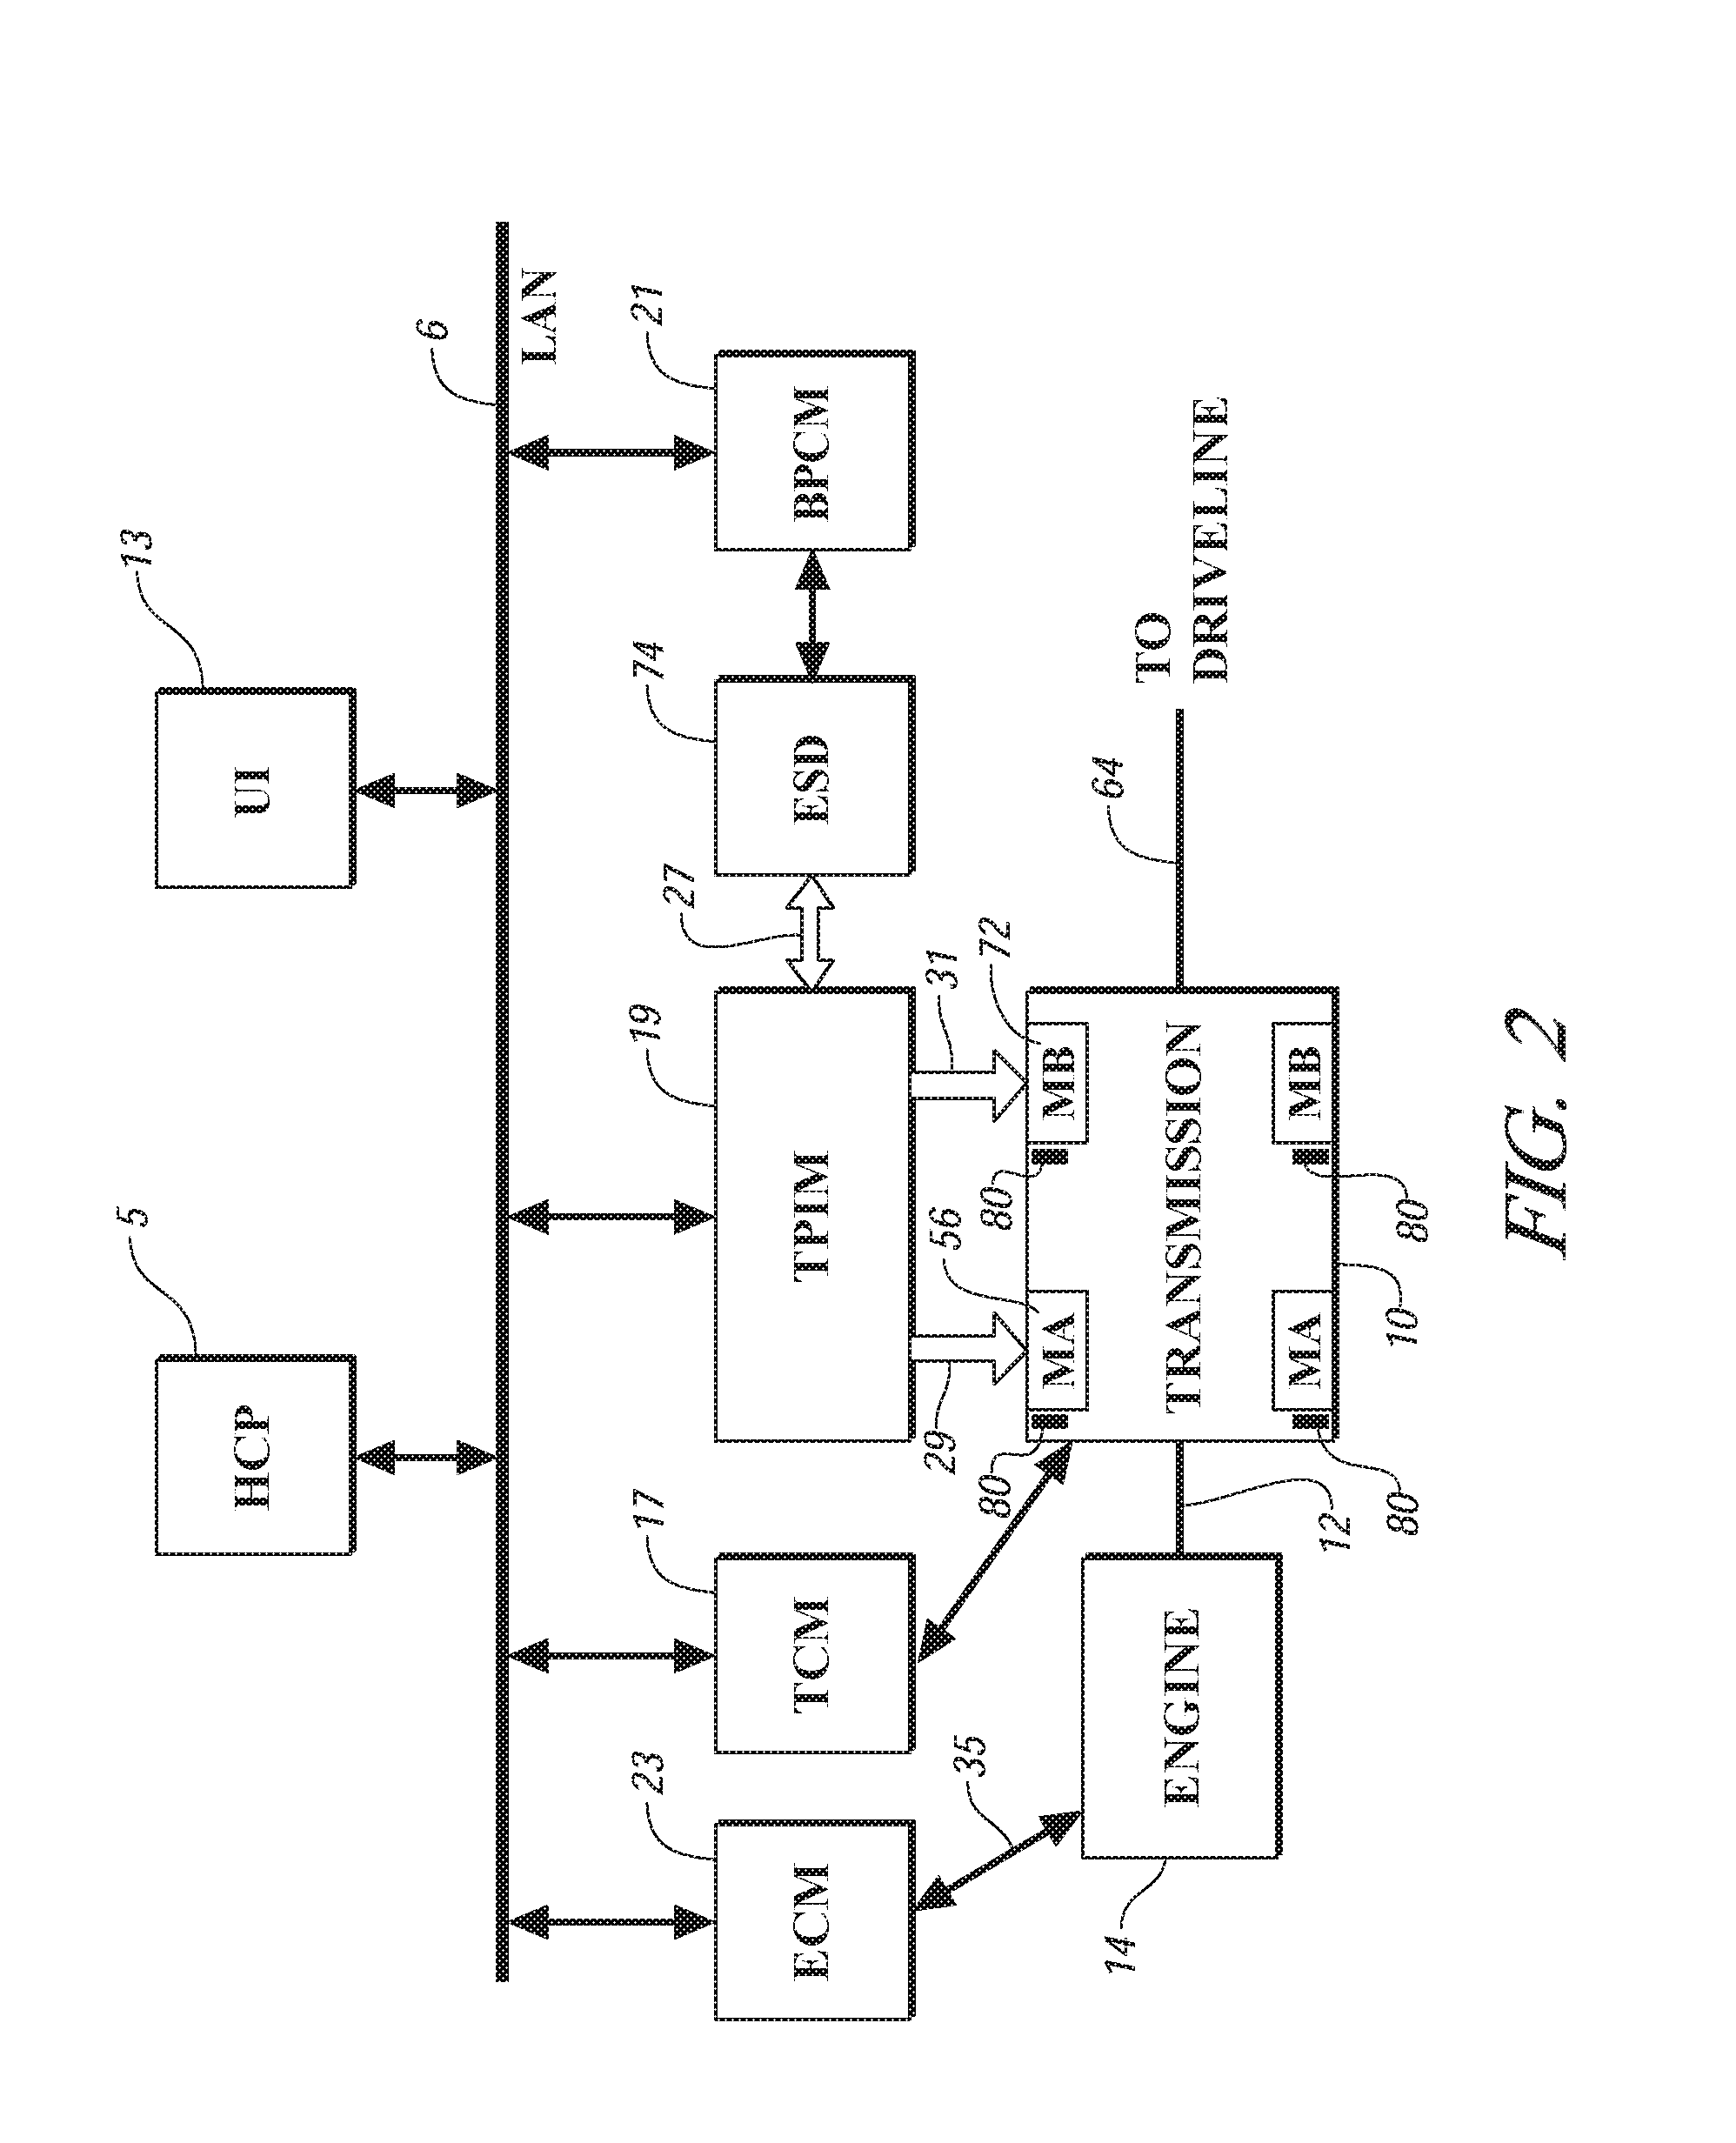 Method and apparatus to determine rotational position of an electrical machine